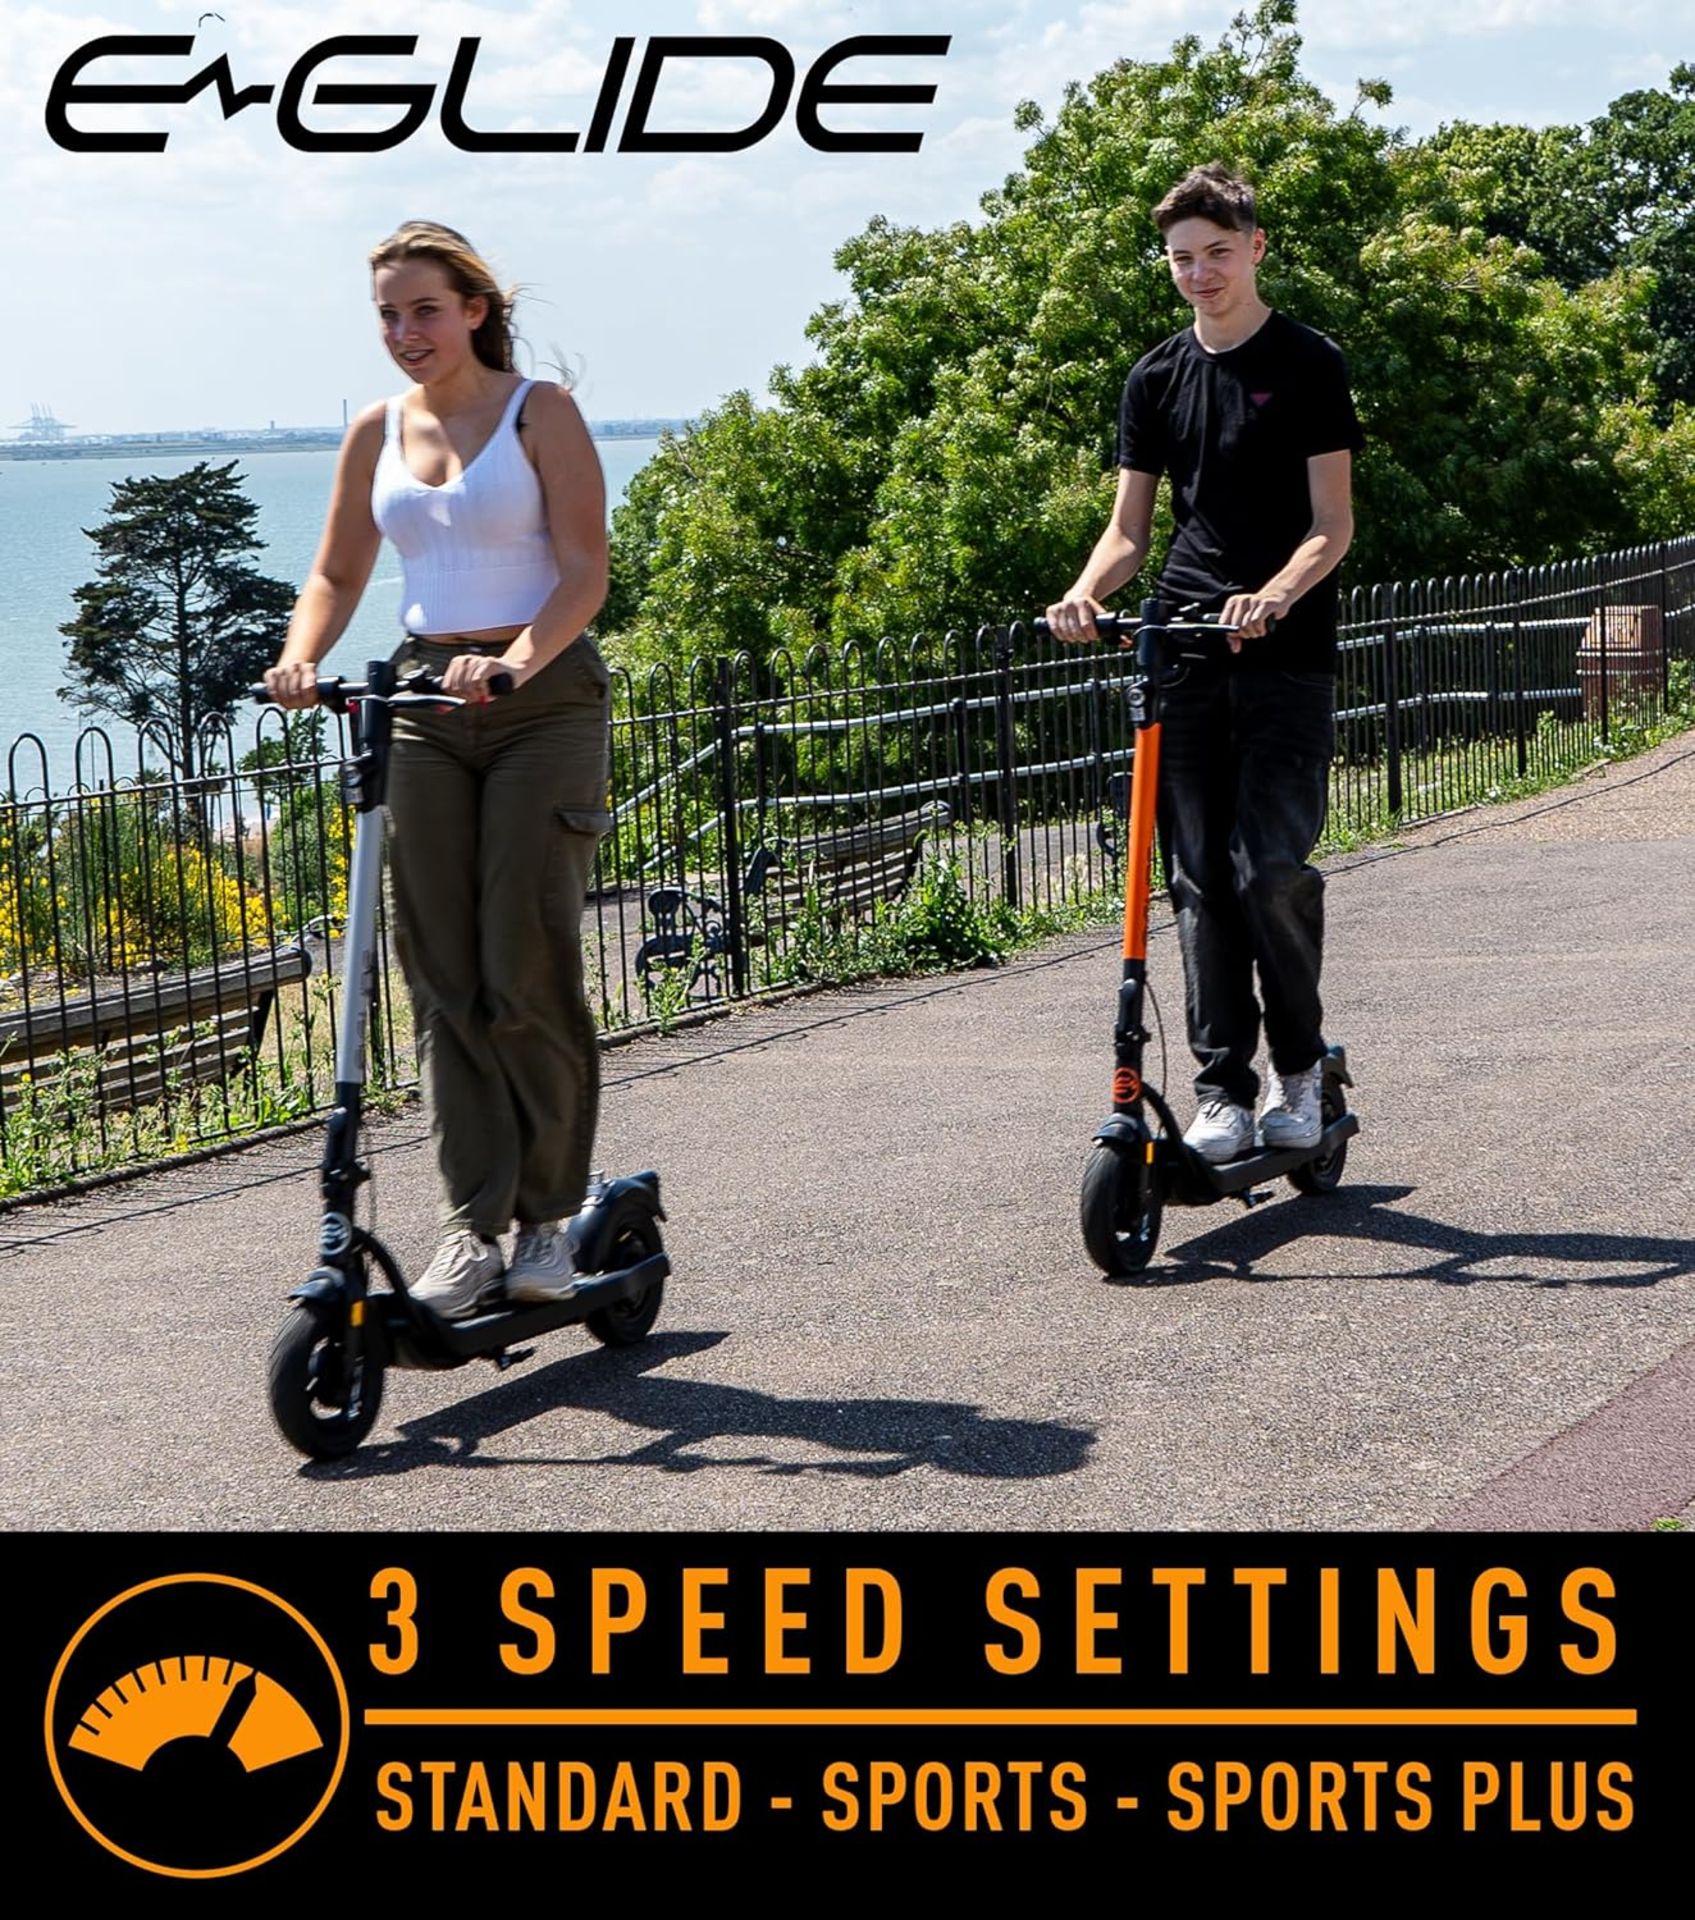 Brand New E-Glide V2 Electric Scooter Orange and Black RRP £599, Introducing a sleek and efficient - Image 6 of 6